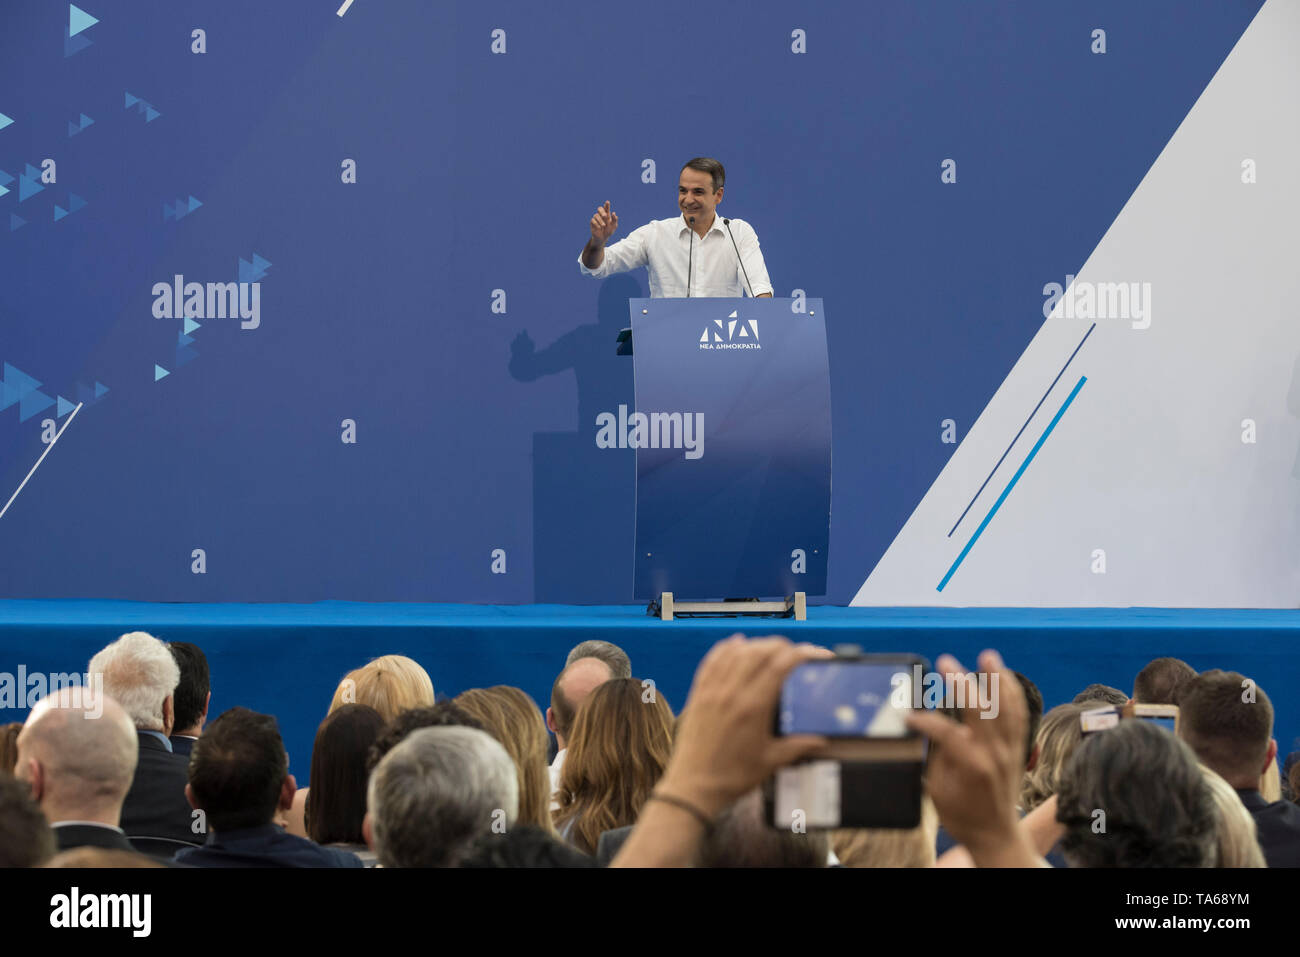 Athens, Greece. 22nd May 2019. KYRIAKOS MITSOTAKIS, leader of the conservative New Democracy party addresses supporters. New Democracy fans attended the party’s main pre-election rally in Athens as Greeks will vote for European Parliament and municipalities on May 26th.© Nikolas Georgiou / Alamy Live News Stock Photo